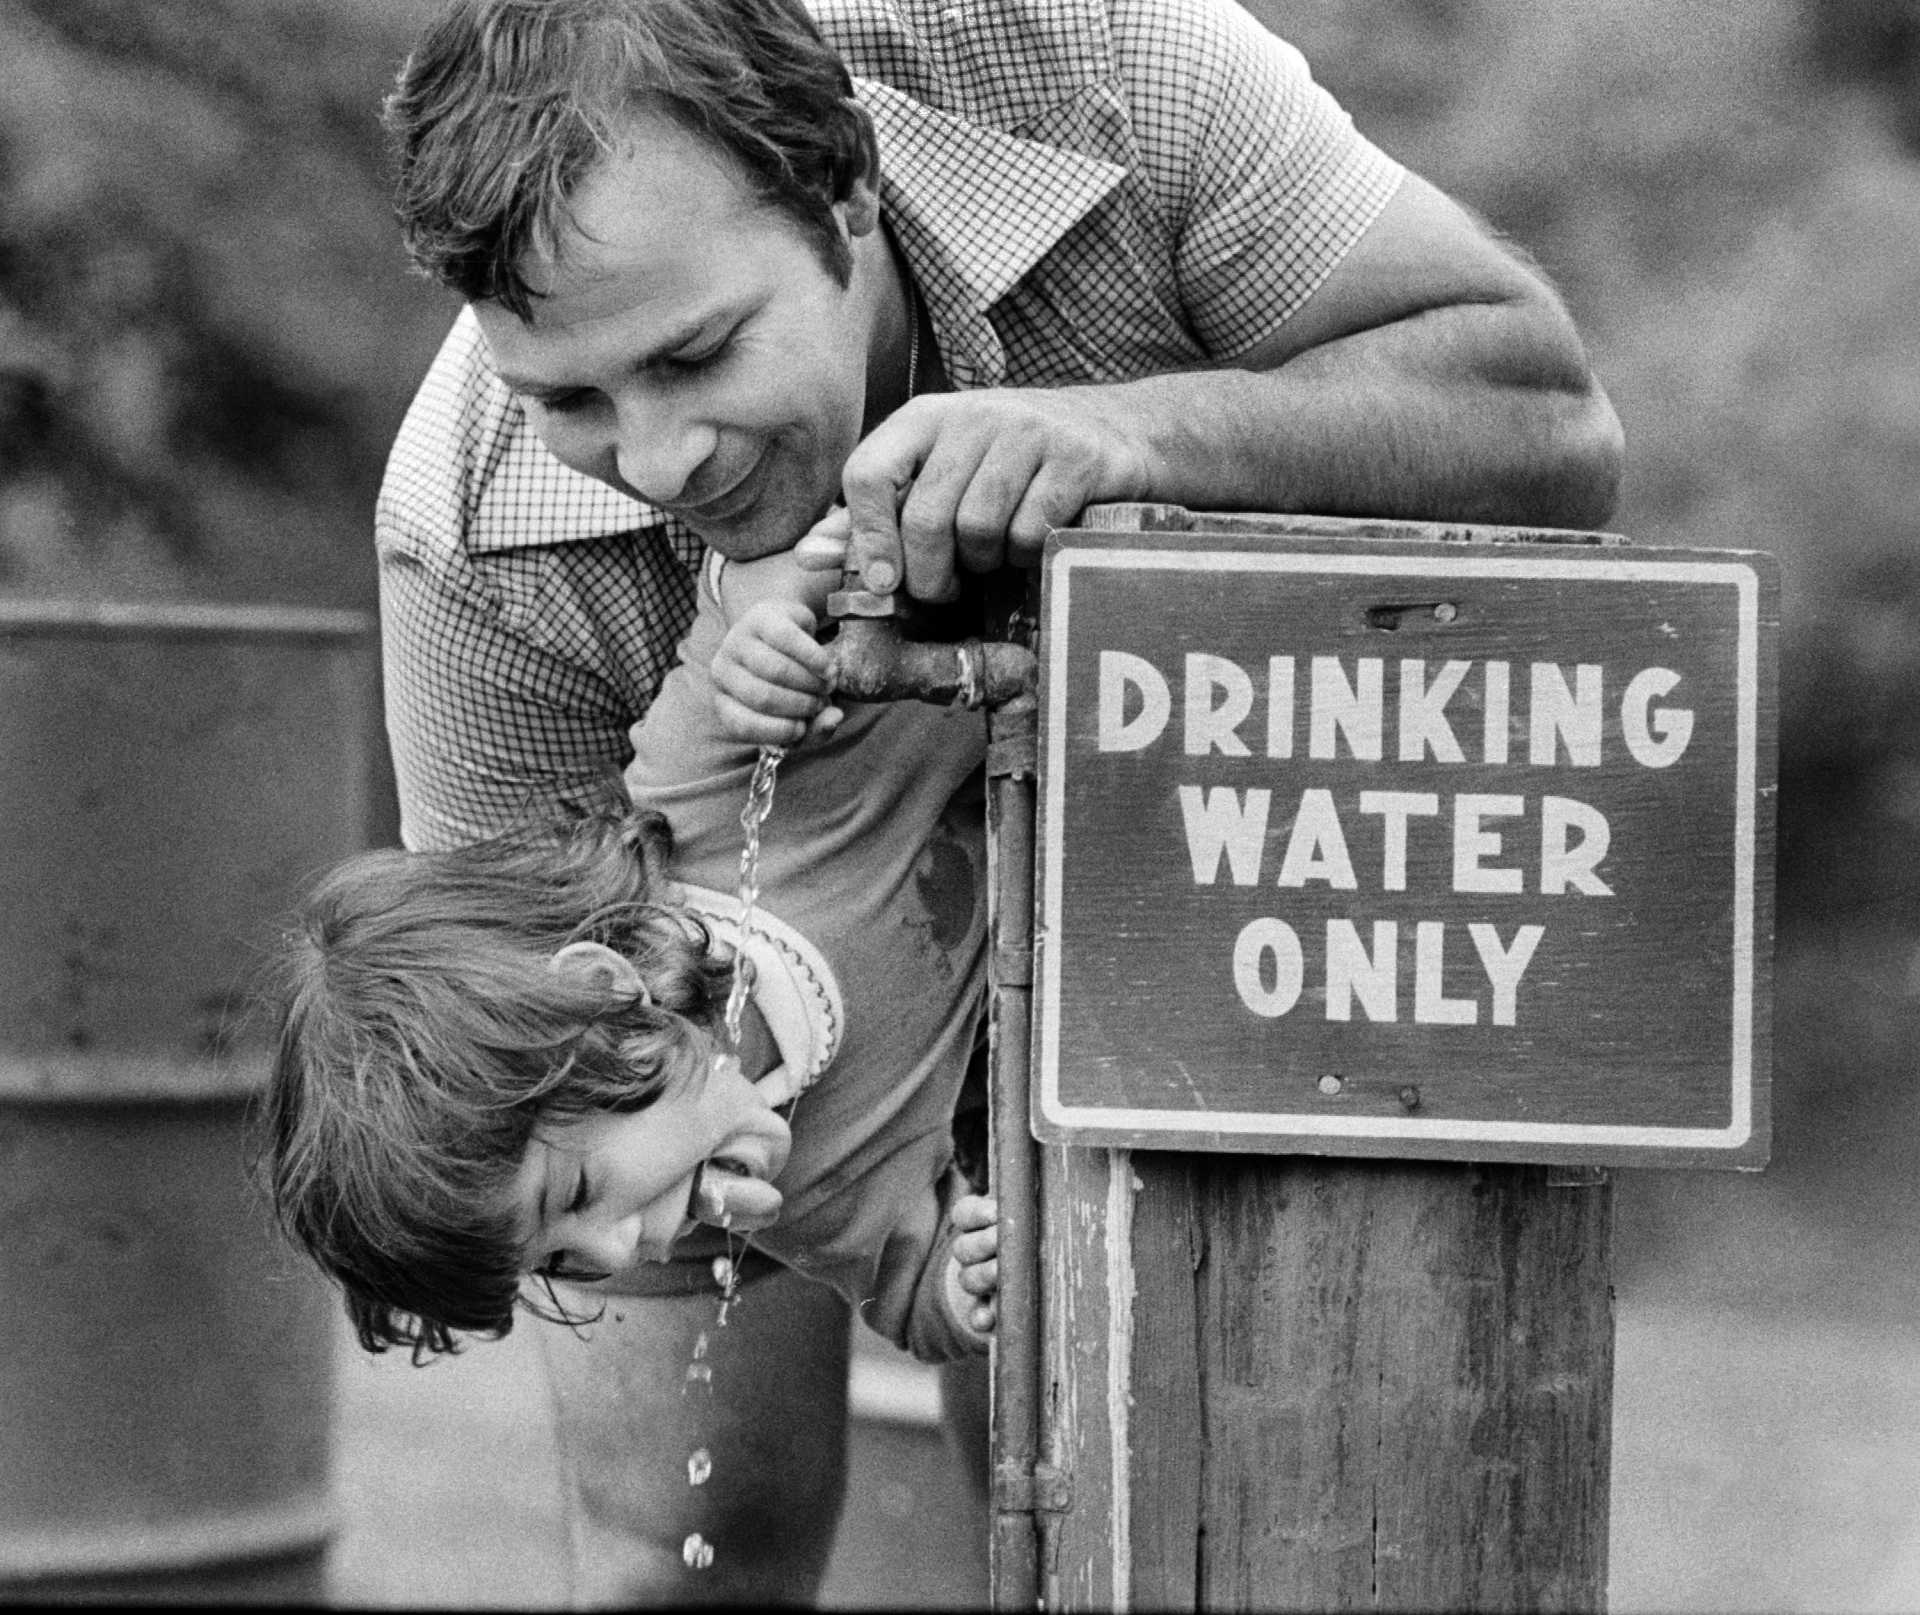 A thirsty kid with his obliging father. 1980